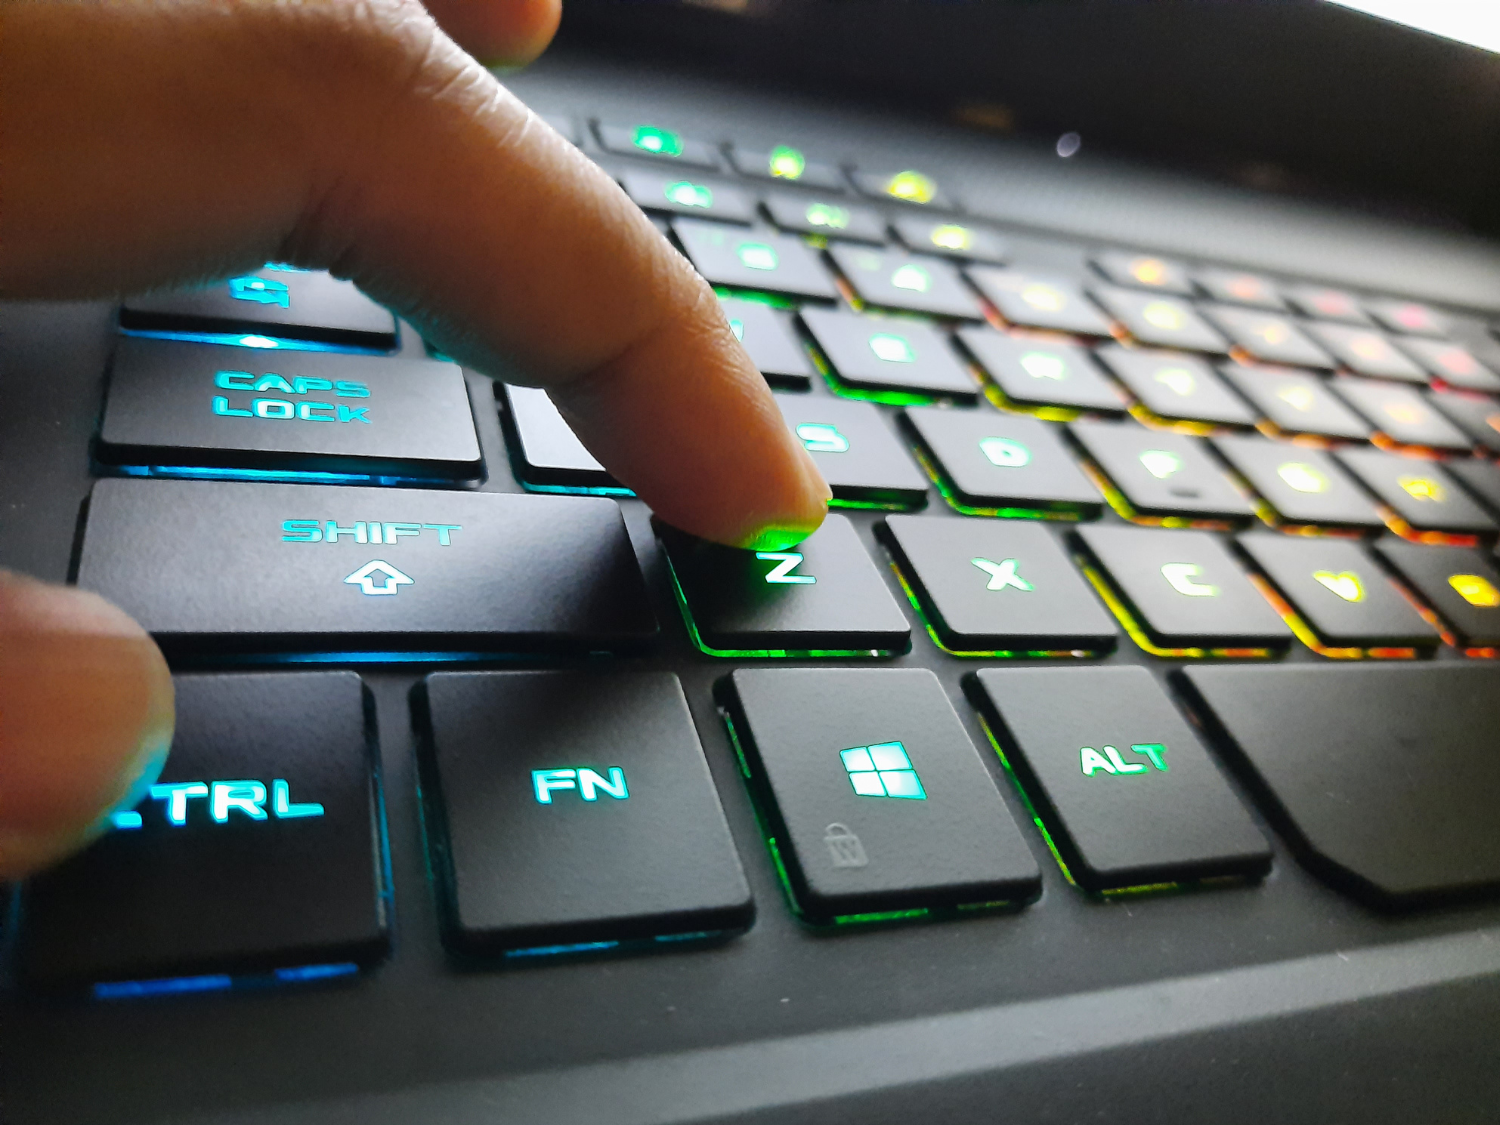 A computer keyboard with a finger on a key